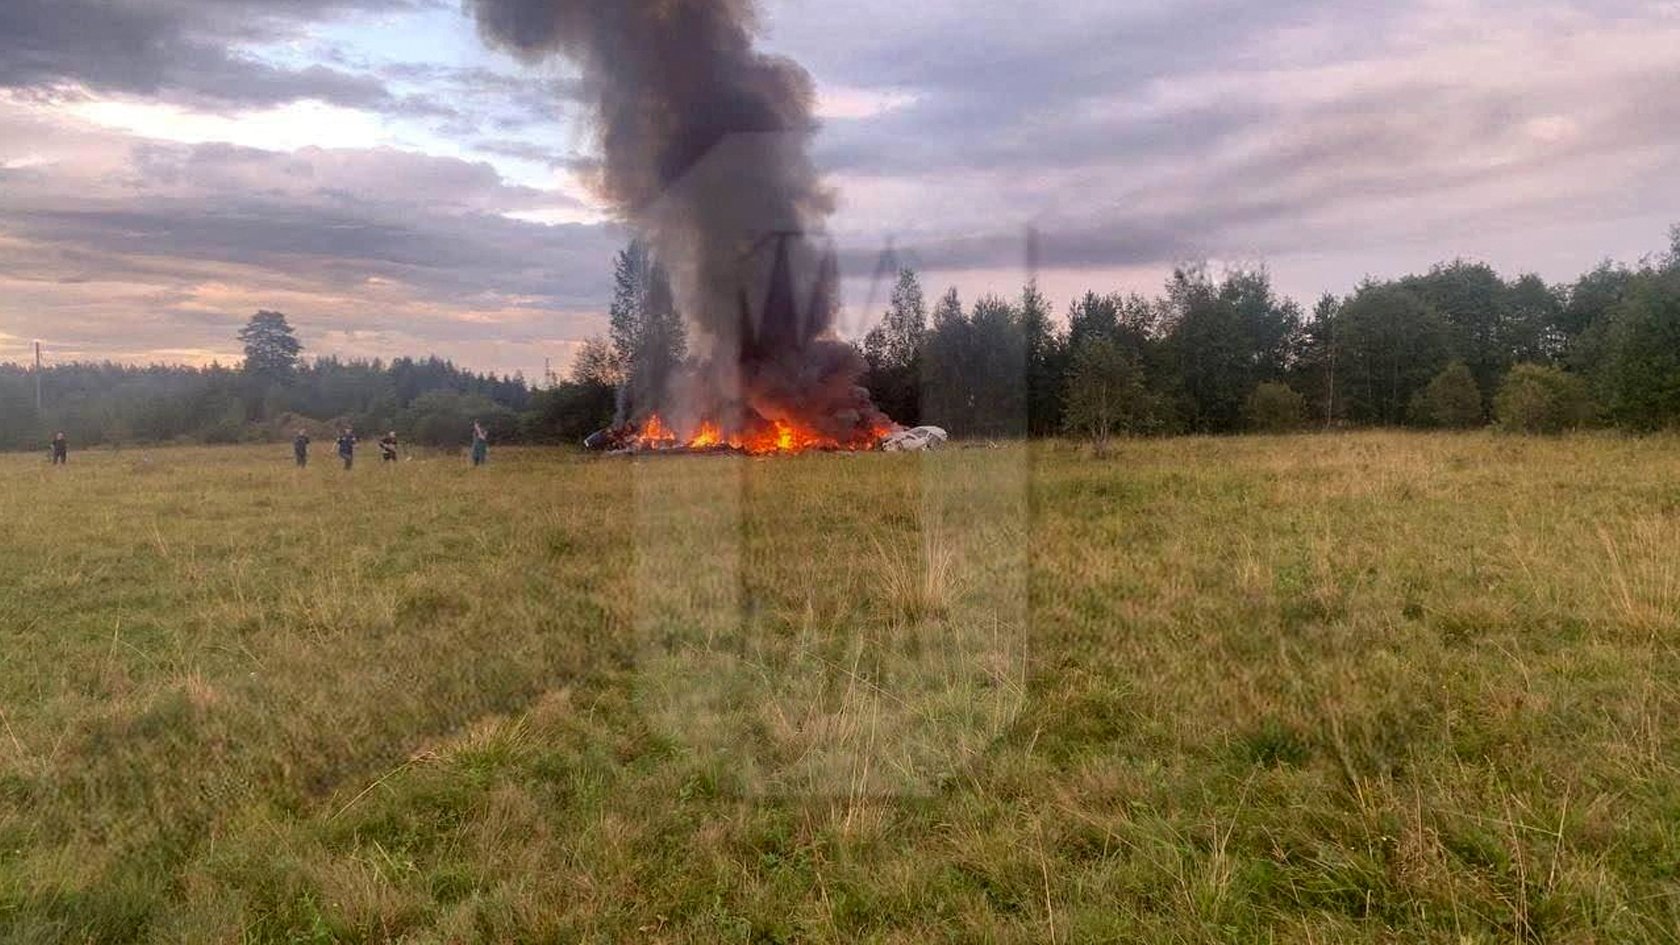 Image, via the Reuters news agency, which appears to show plane wreckage on fire at a location given as Tver region, western Russia